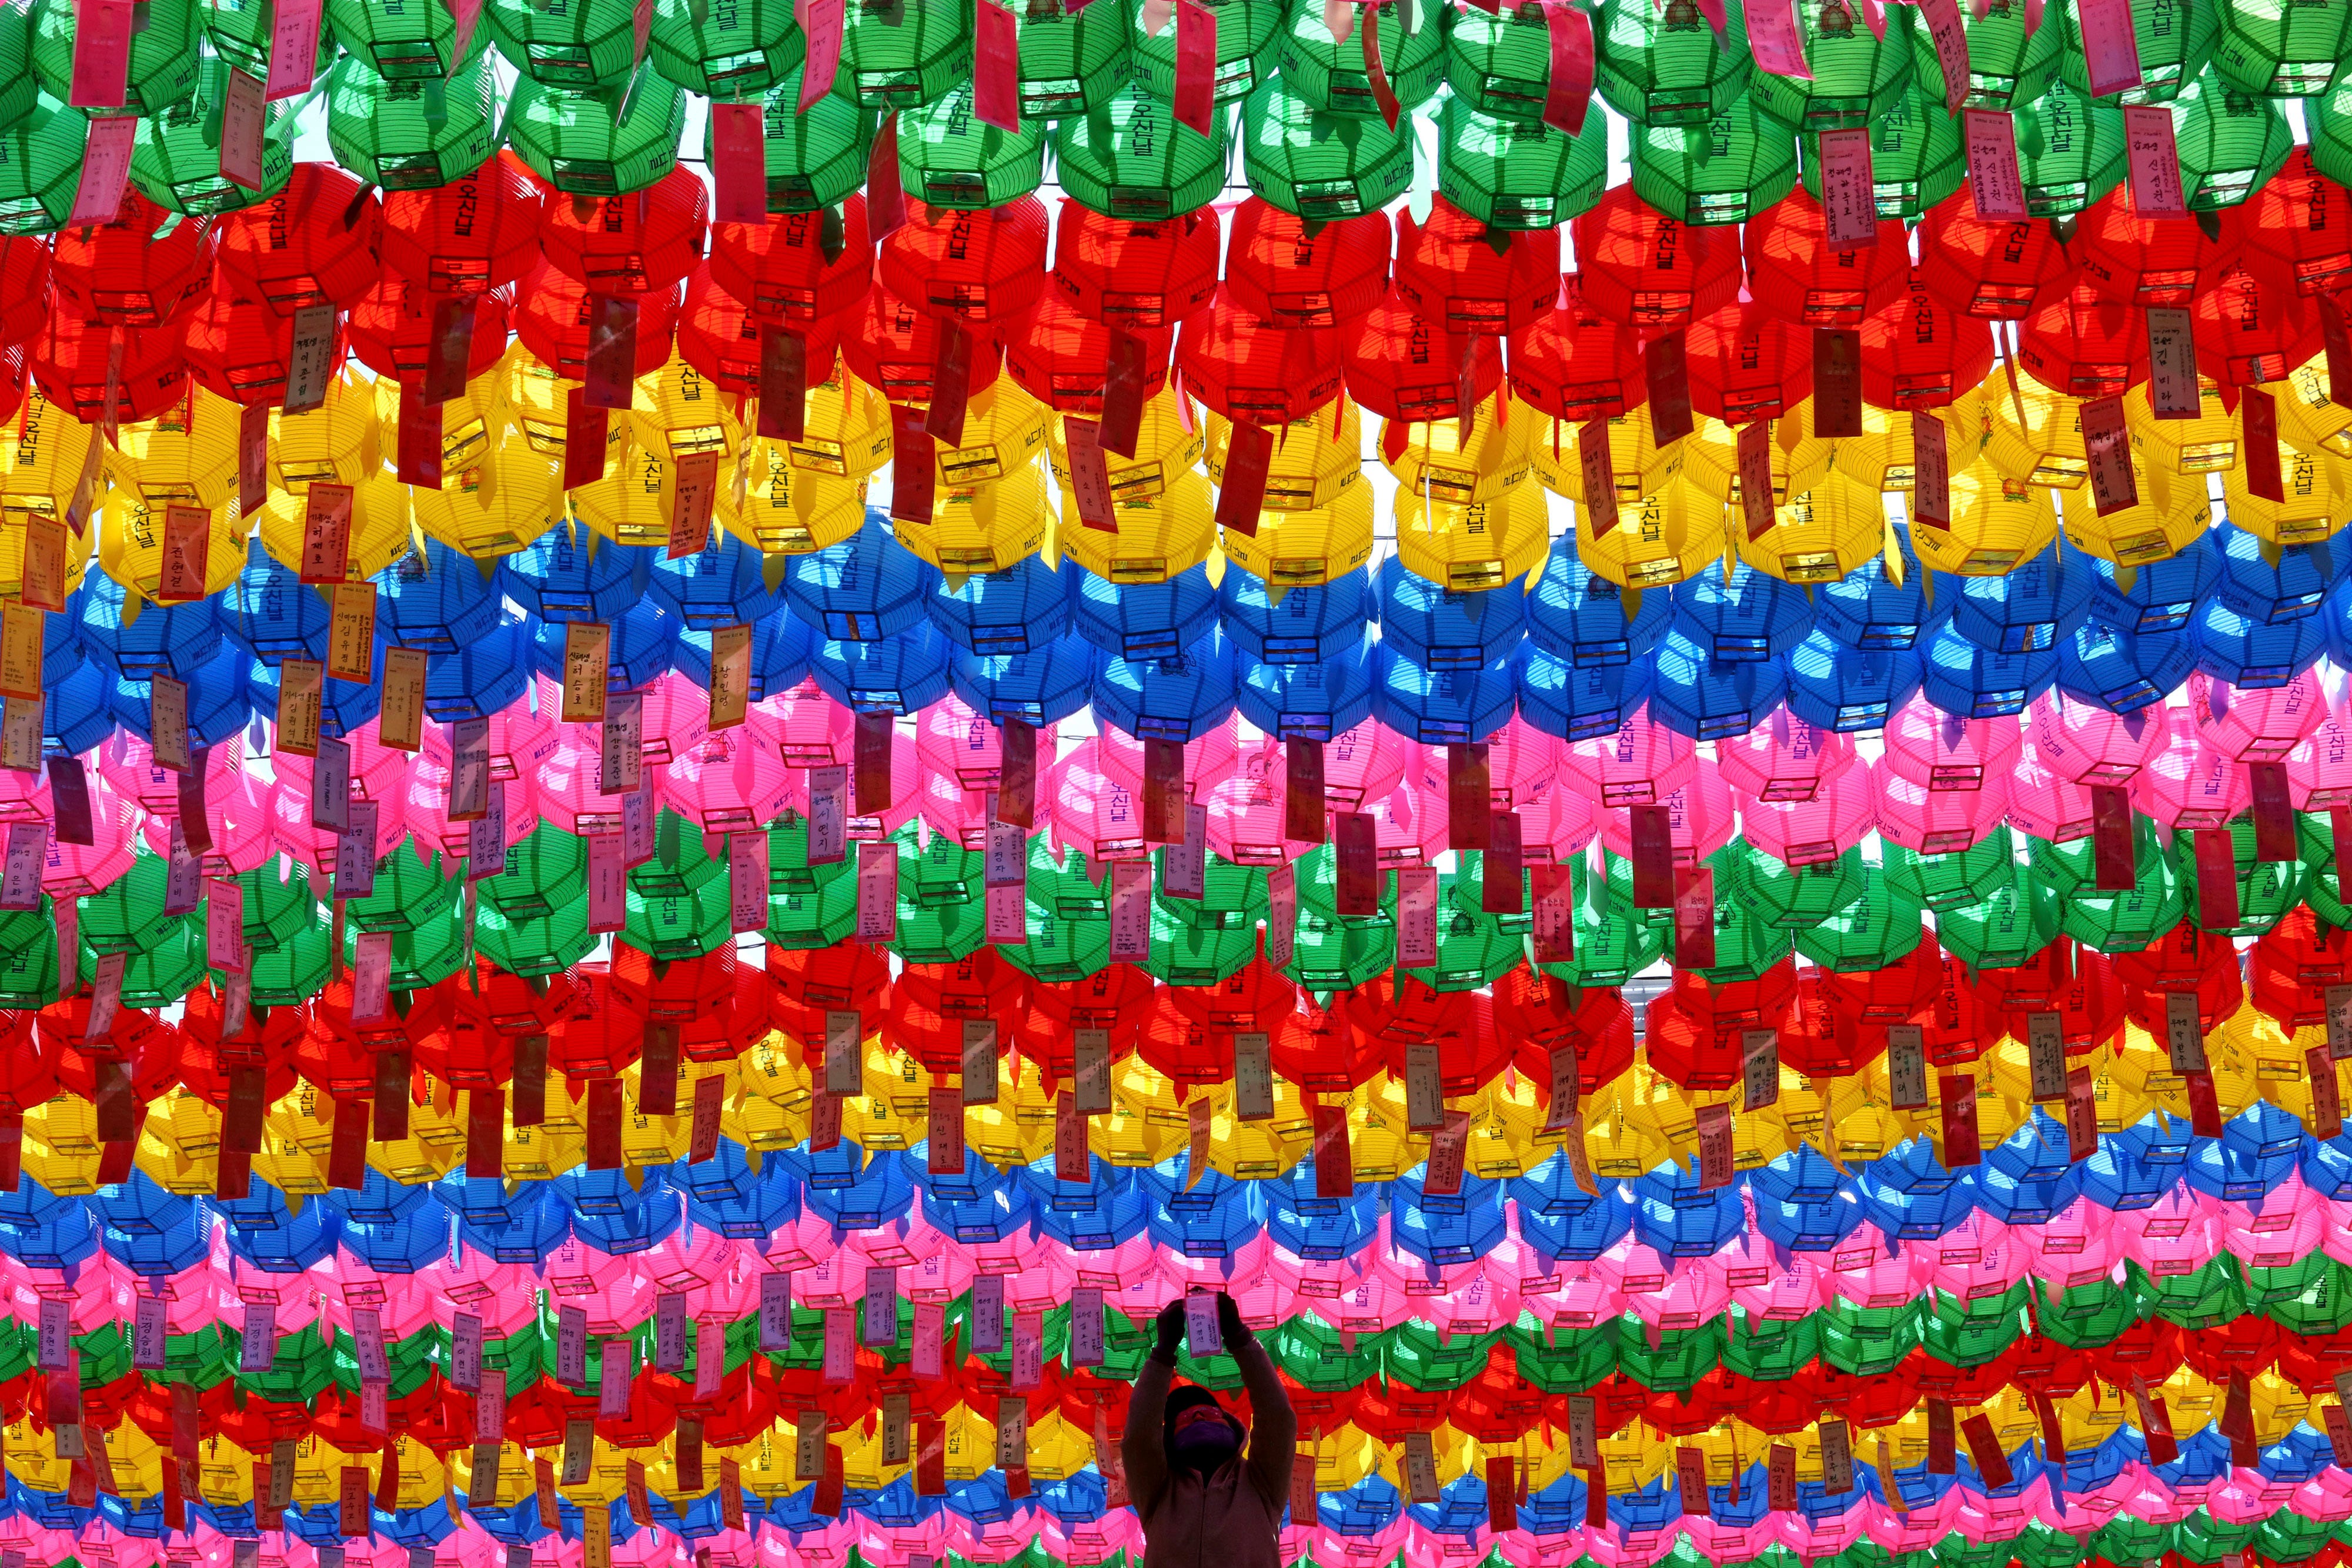 A worker attaches a name tag to a lantern of a Buddhist who made donation for the upcoming celebration of Buddha's birthday on May 22 at the Jogye temple in Seoul, South Korea. Similar lanterns will be displayed in all Buddhist temples around South K